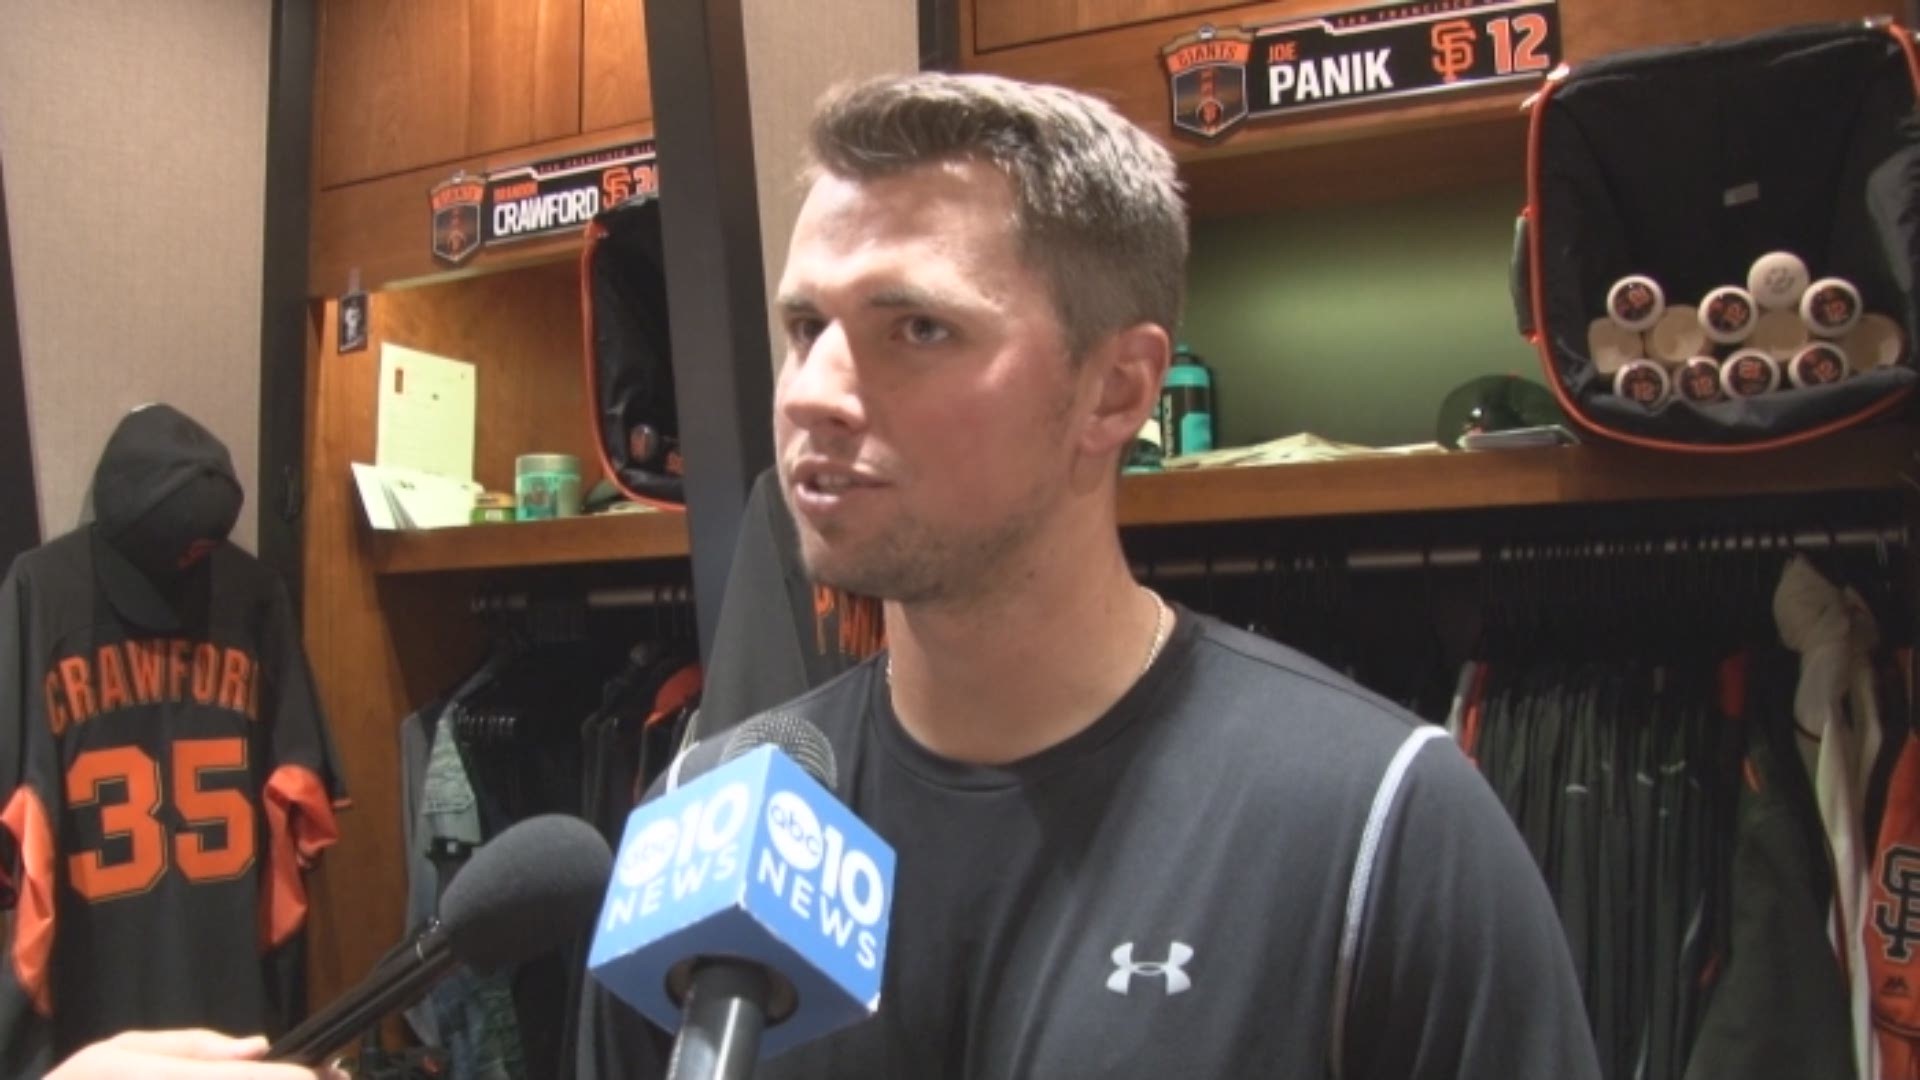 San Francisco Giants' second baseman Joe Panik talks about Thursday's home opening day win over the Los Angeles Dodgers, the team's offensive fire-power and recent rule changes in the infield which affects his position.